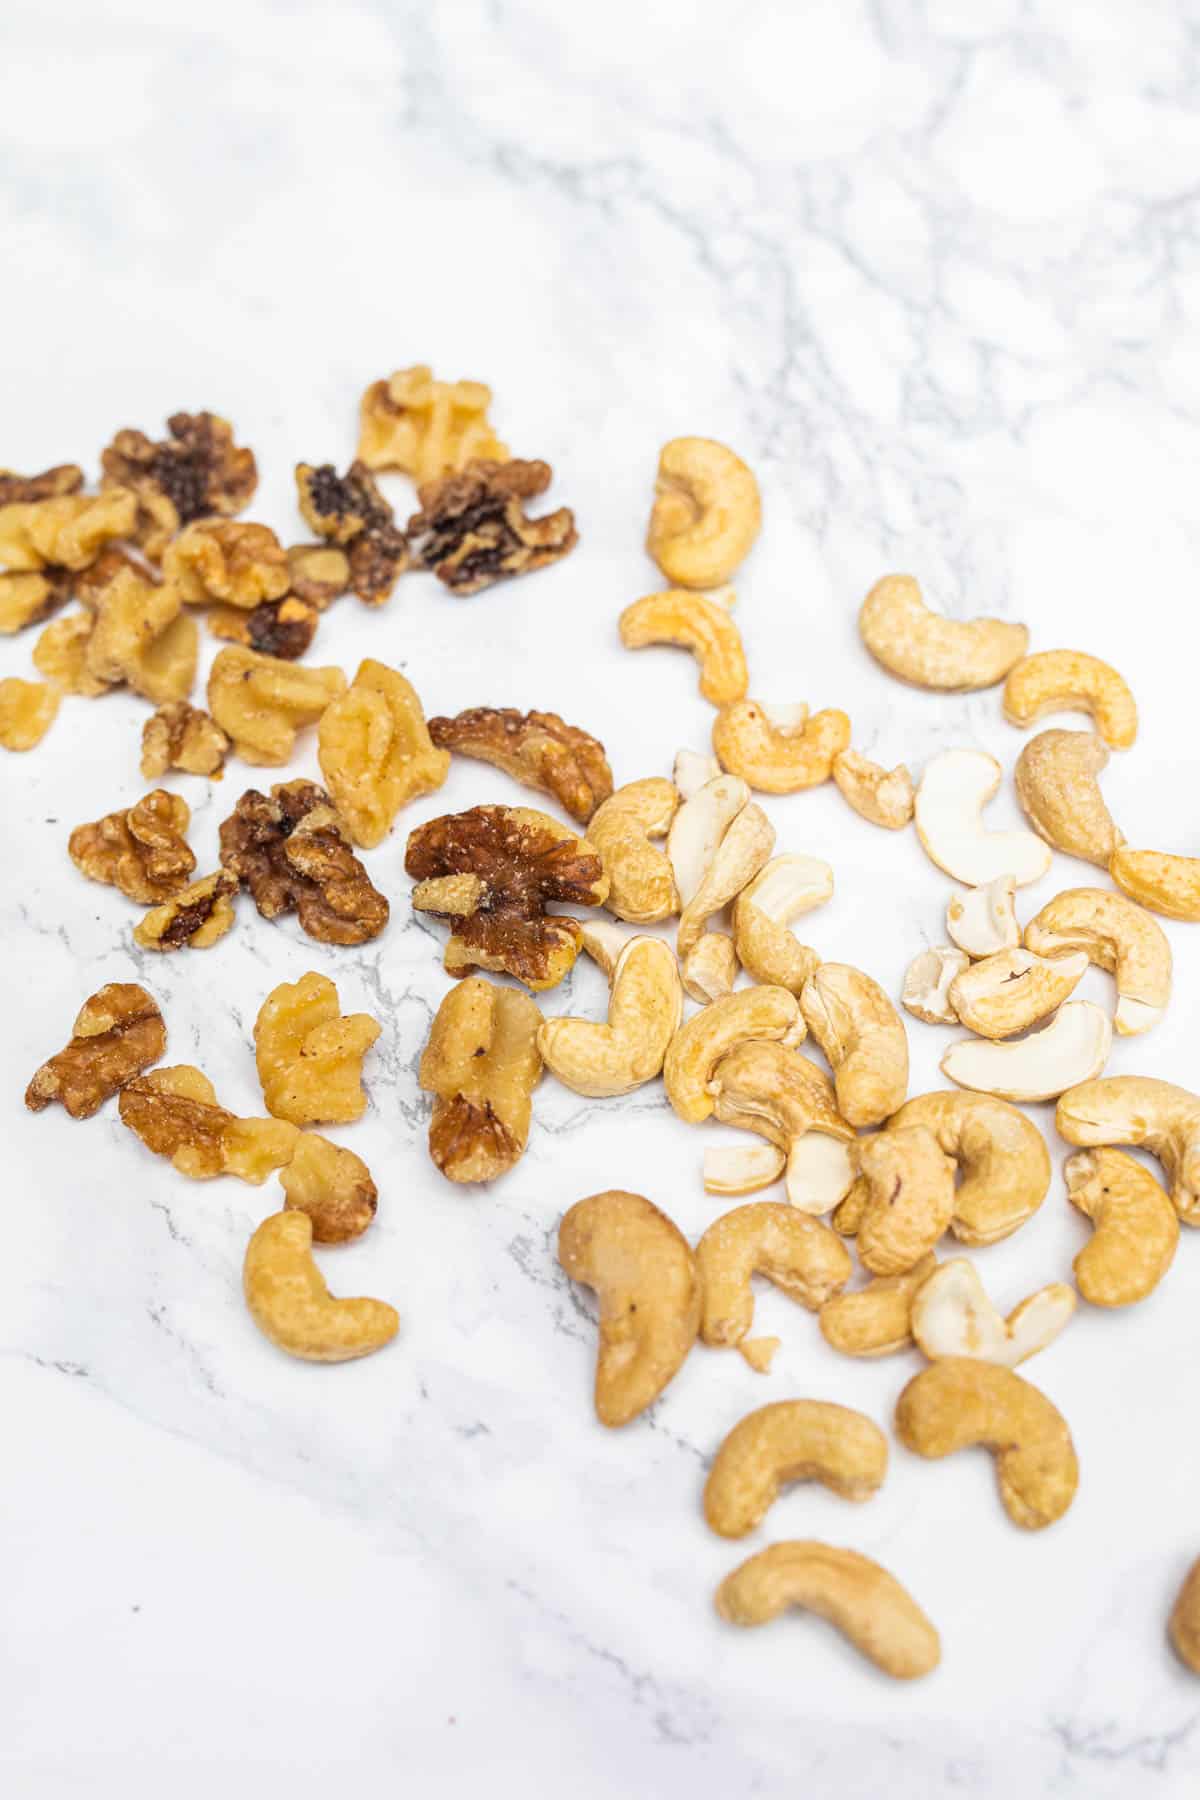 Raw walnuts and cashews scattered on white marble surface